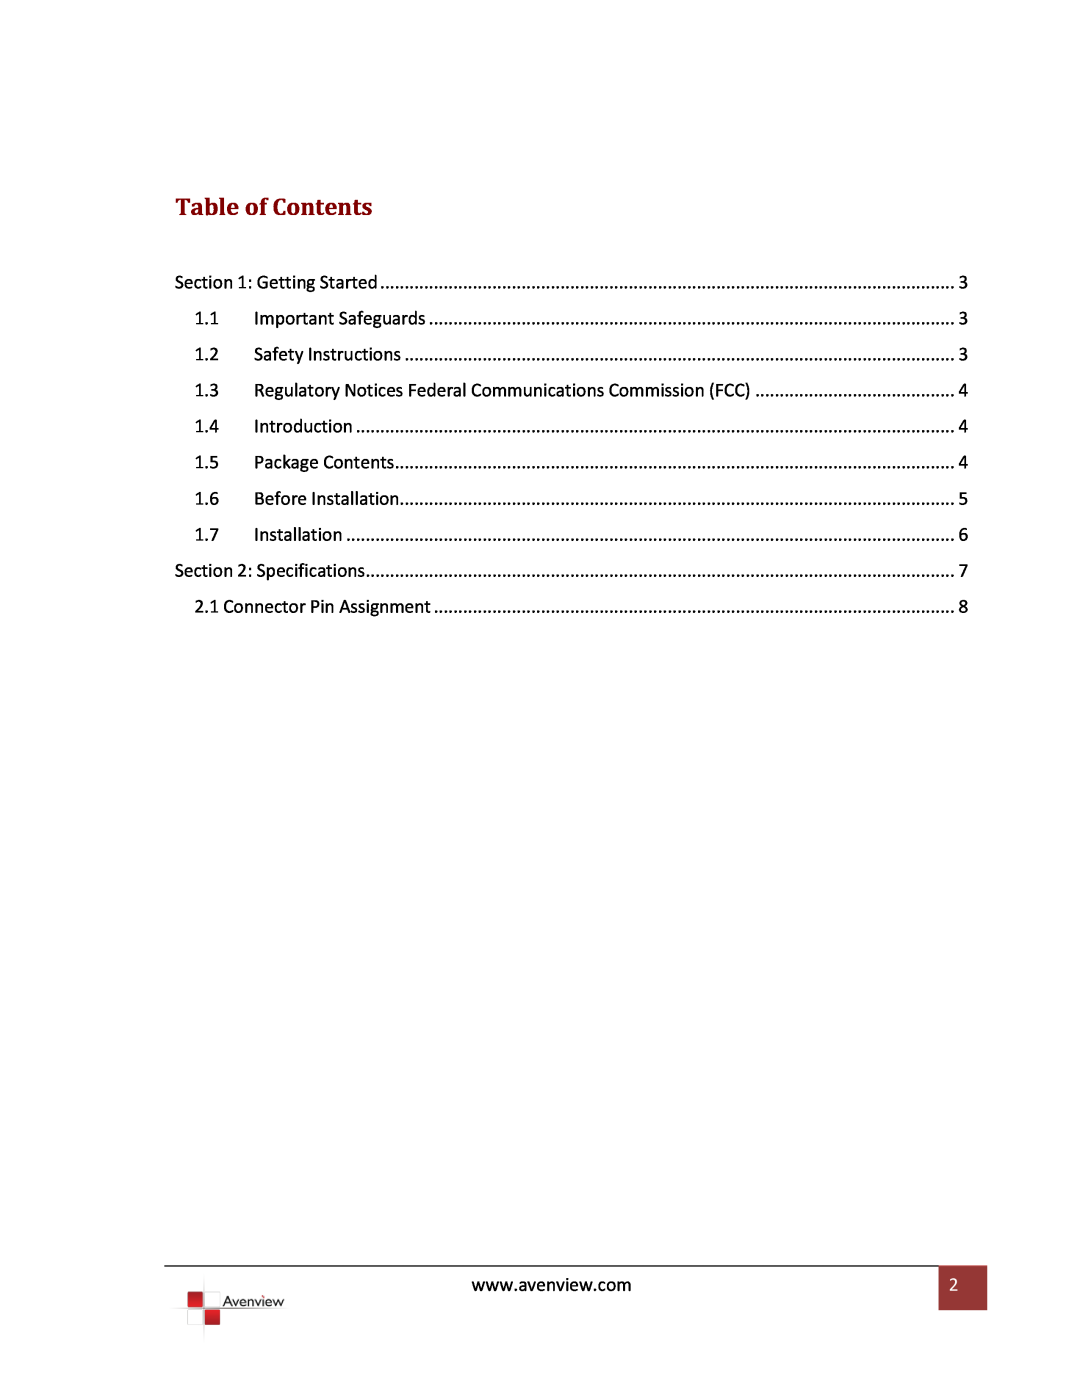 Avenview SPLIT-DVI-2 specifications Table of Contents, Regulatory Notices Federal Communications Commission FCC 